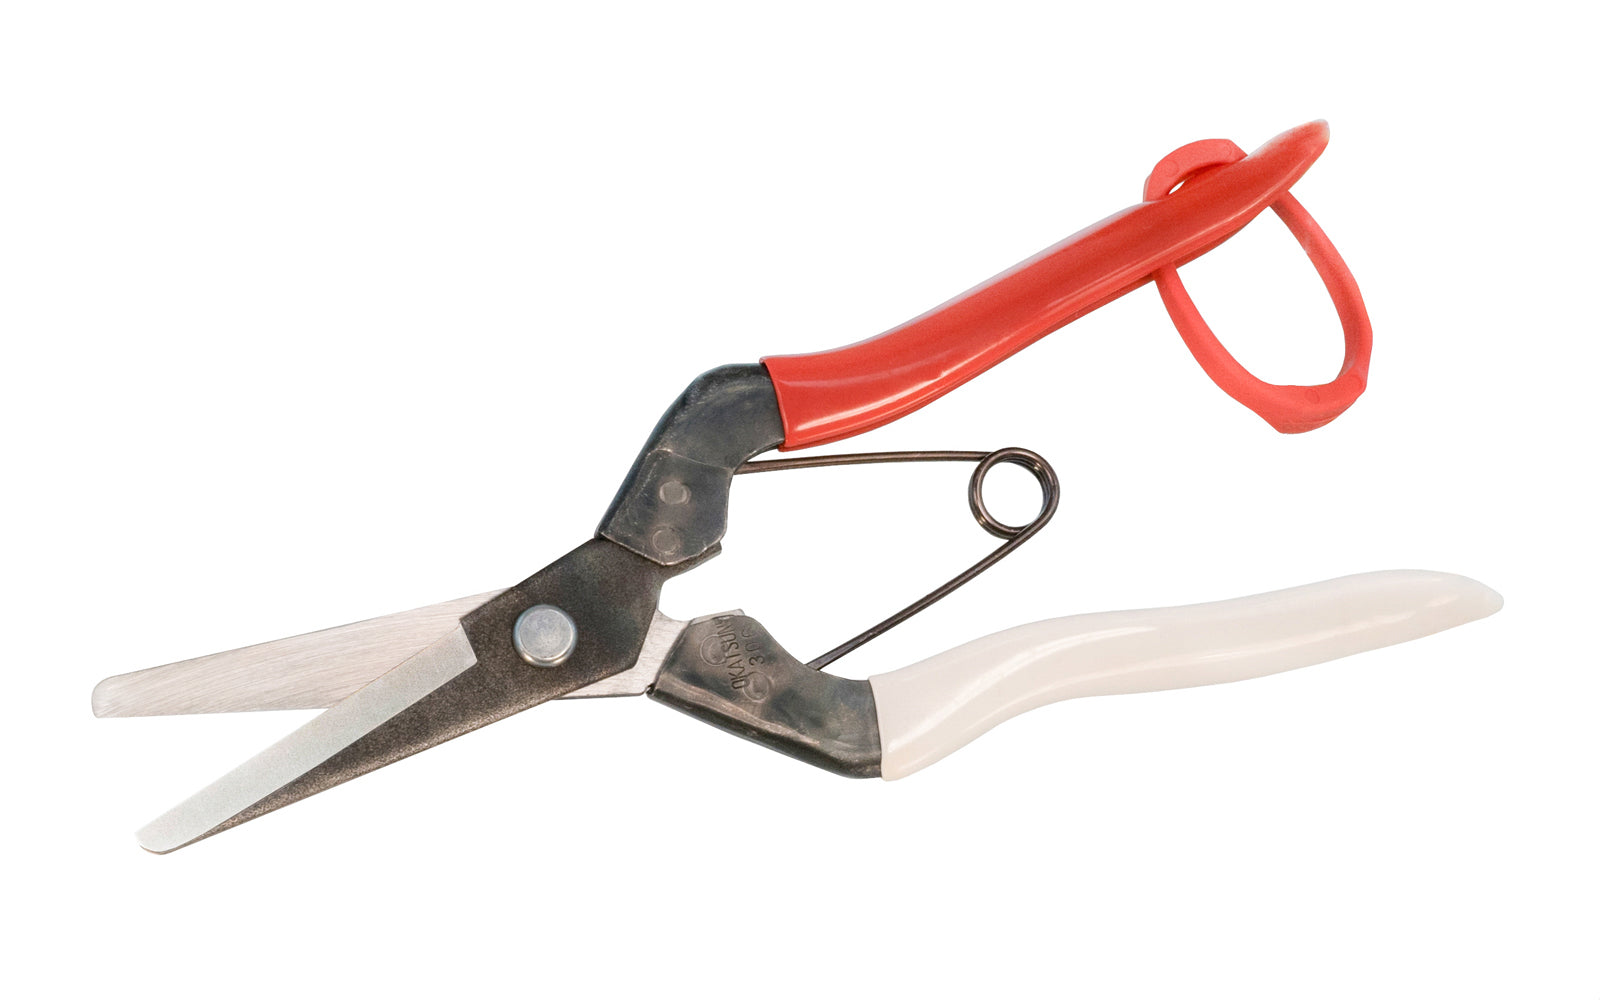 Shears, Saws, Snips, and Other Cutting Tools - Malco Products